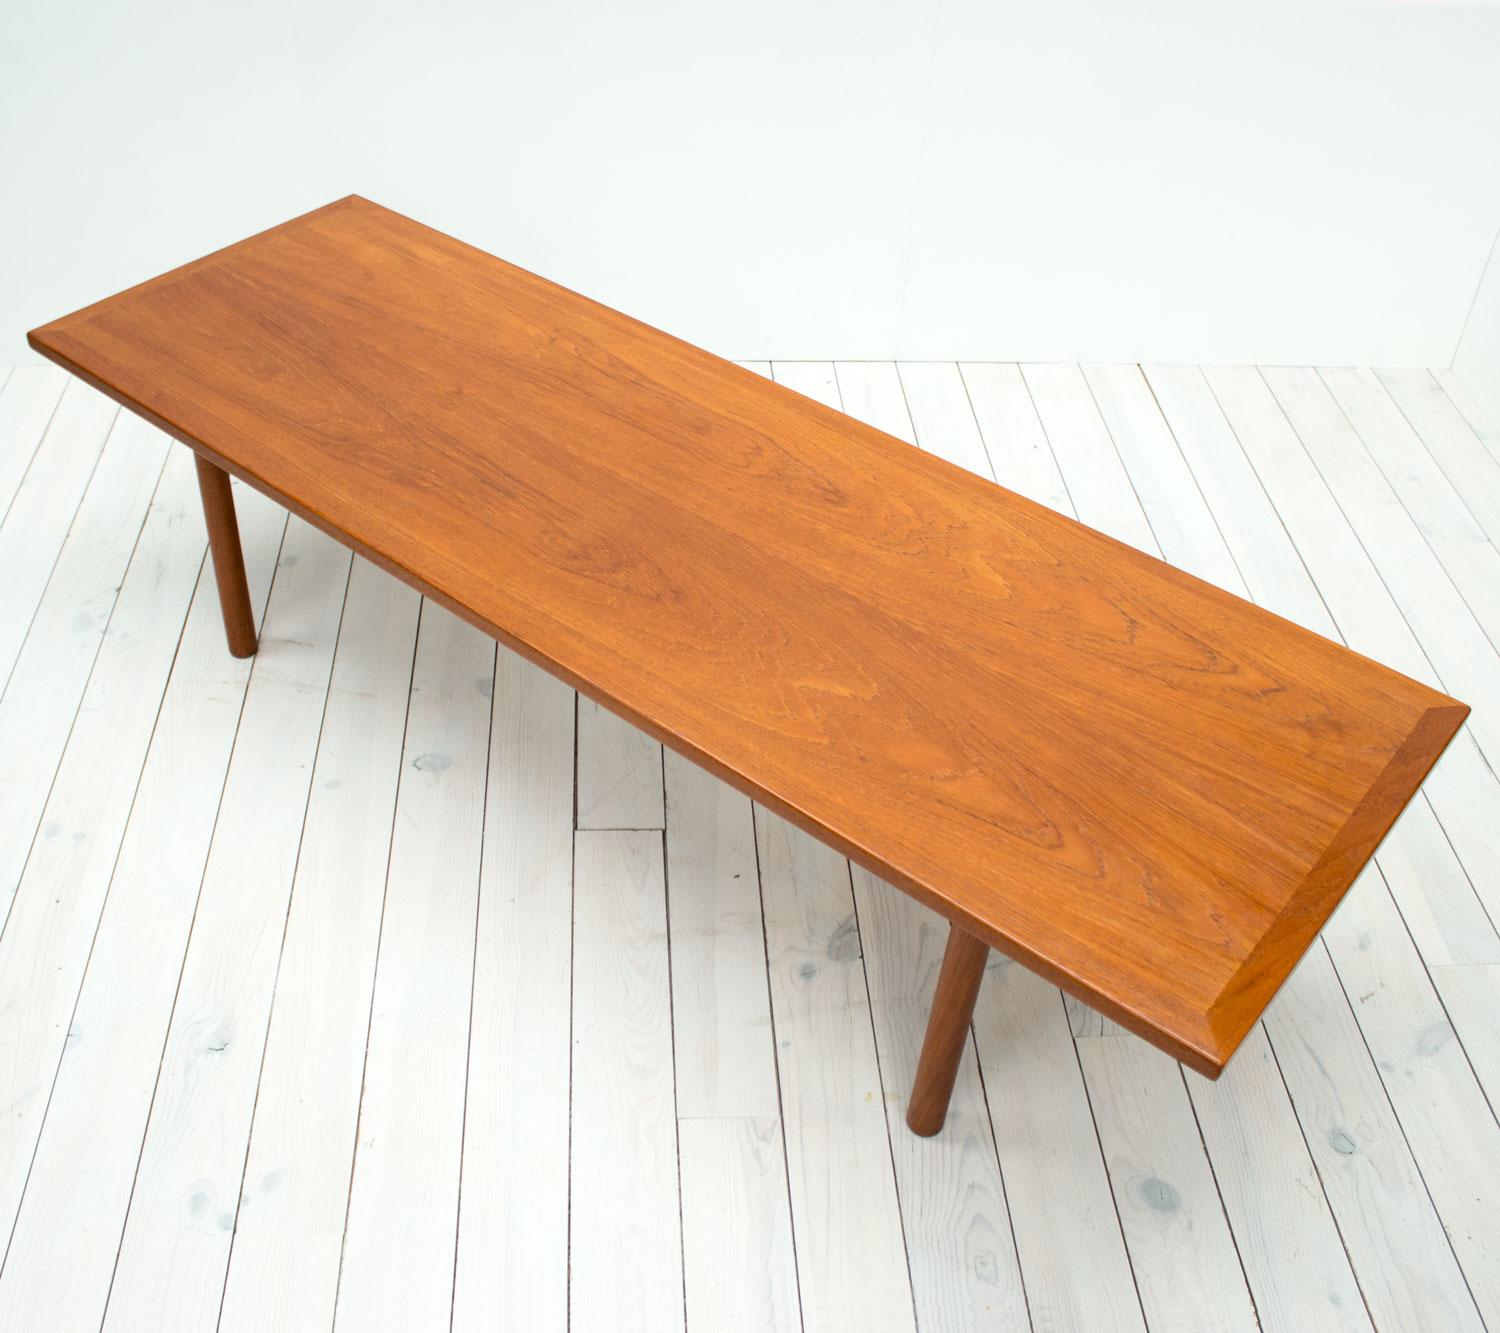 1960s Danish teak model AT-12 coffee table by Hans J. Wegner for Andreas Tuck. A lovely minimalist piece with a long rectangular top on turned legs. The legs unscrew making this item easy to flat pack and ship.

